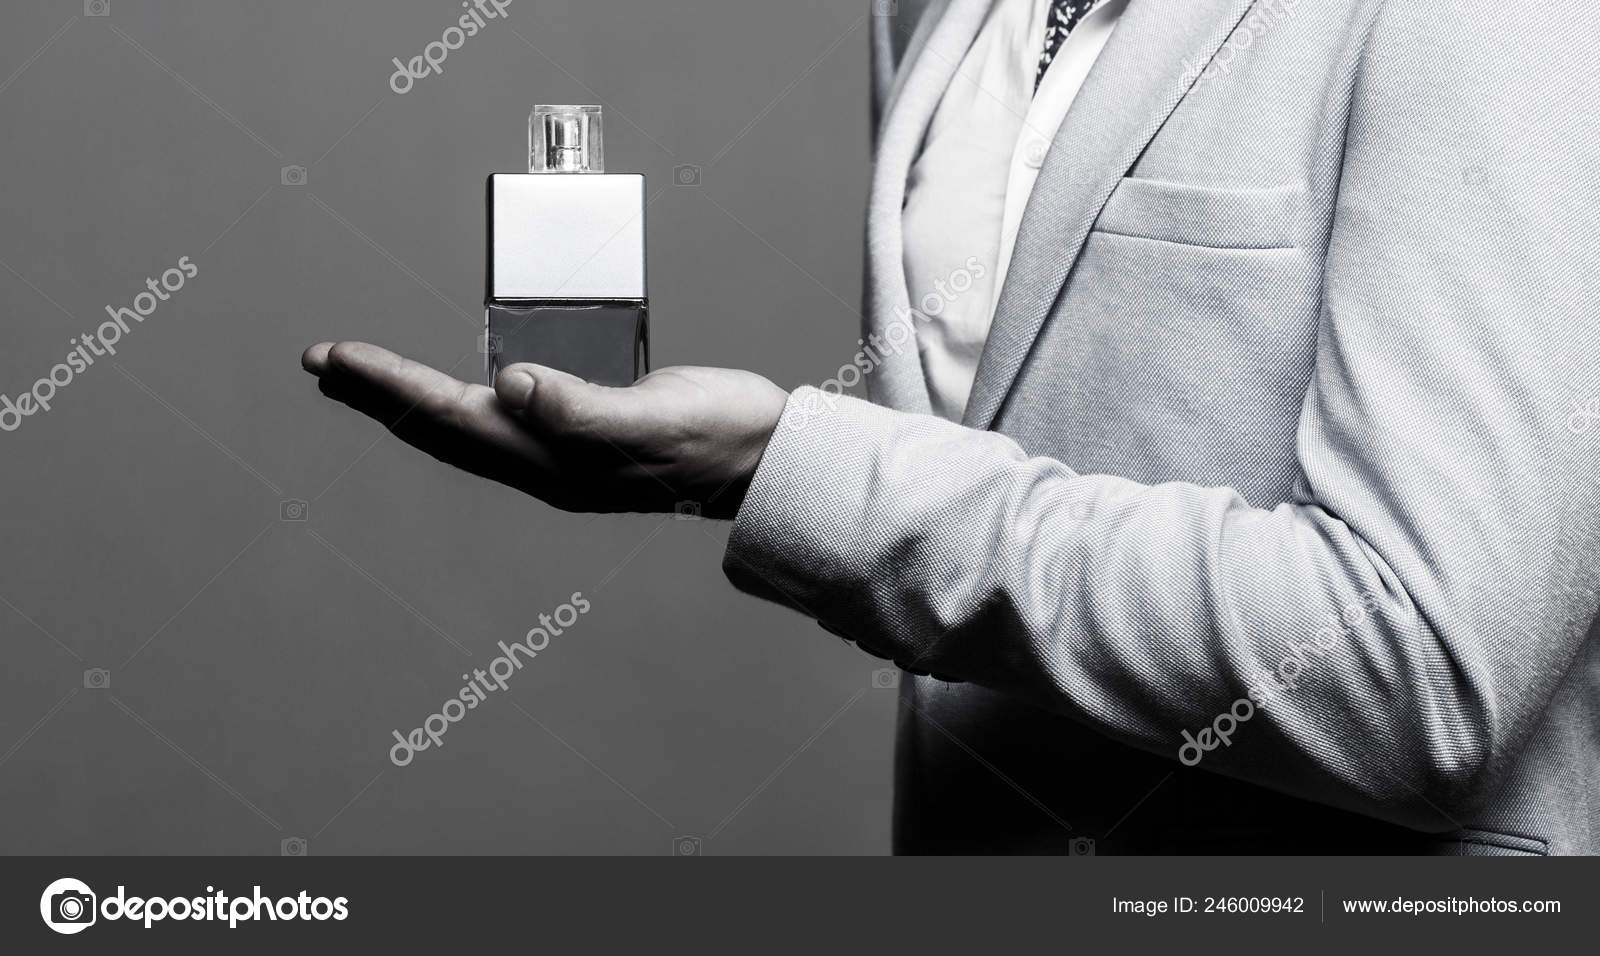 Masculine perfume, man in a suit. Man perfume, fragrance. Male holding up  bottle of perfume. Perfume